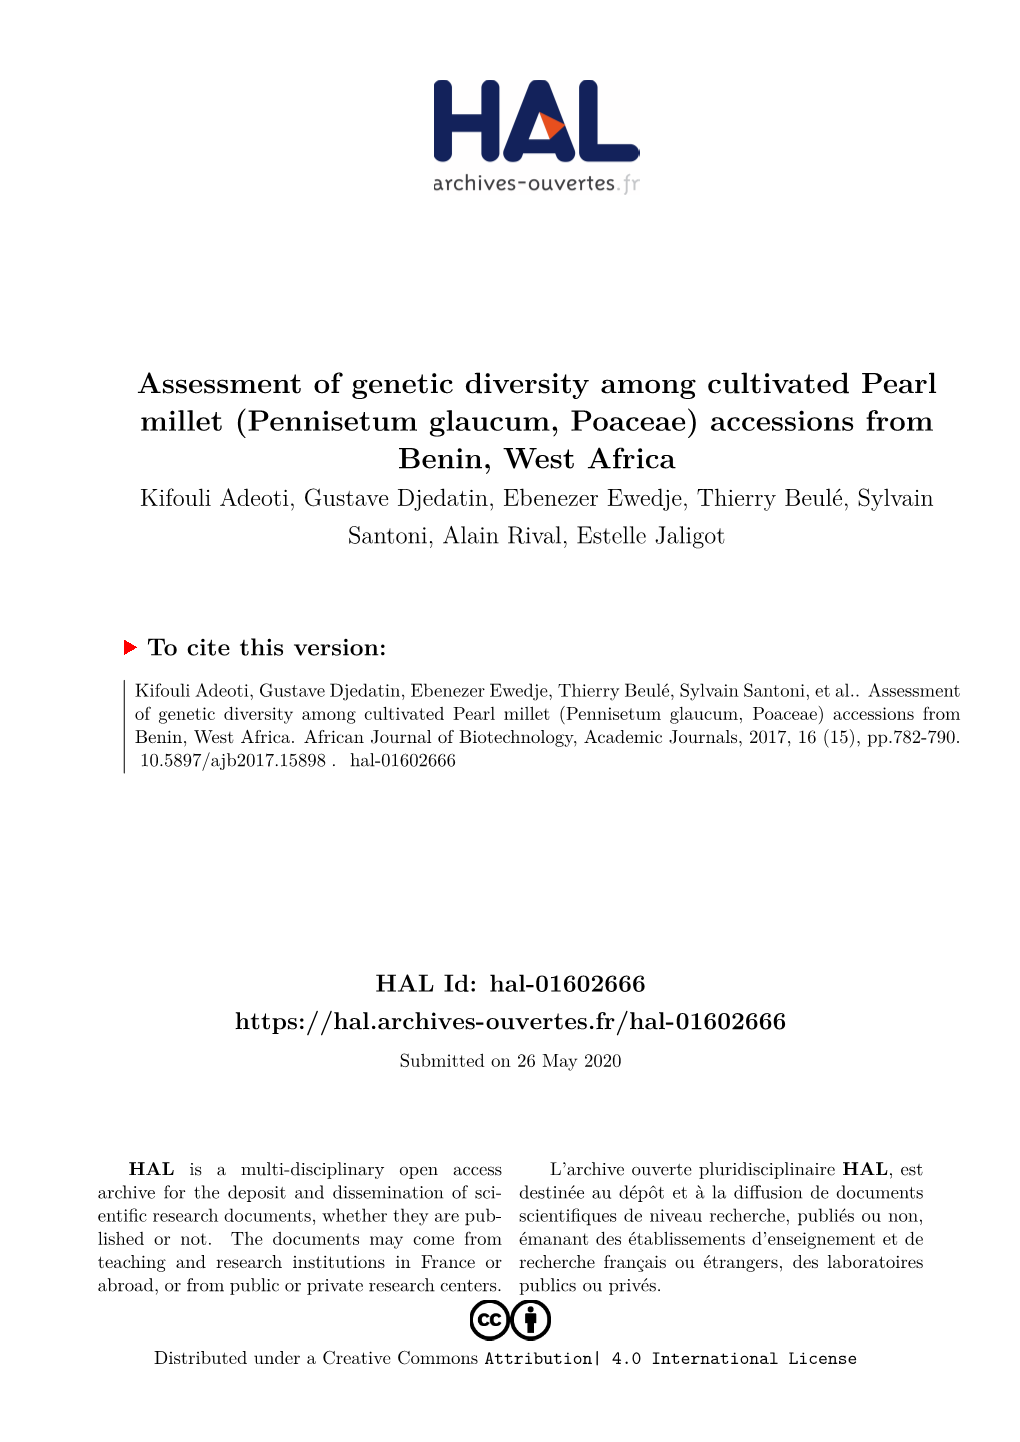 Assessment of Genetic Diversity Among Cultivated Pearl Millet